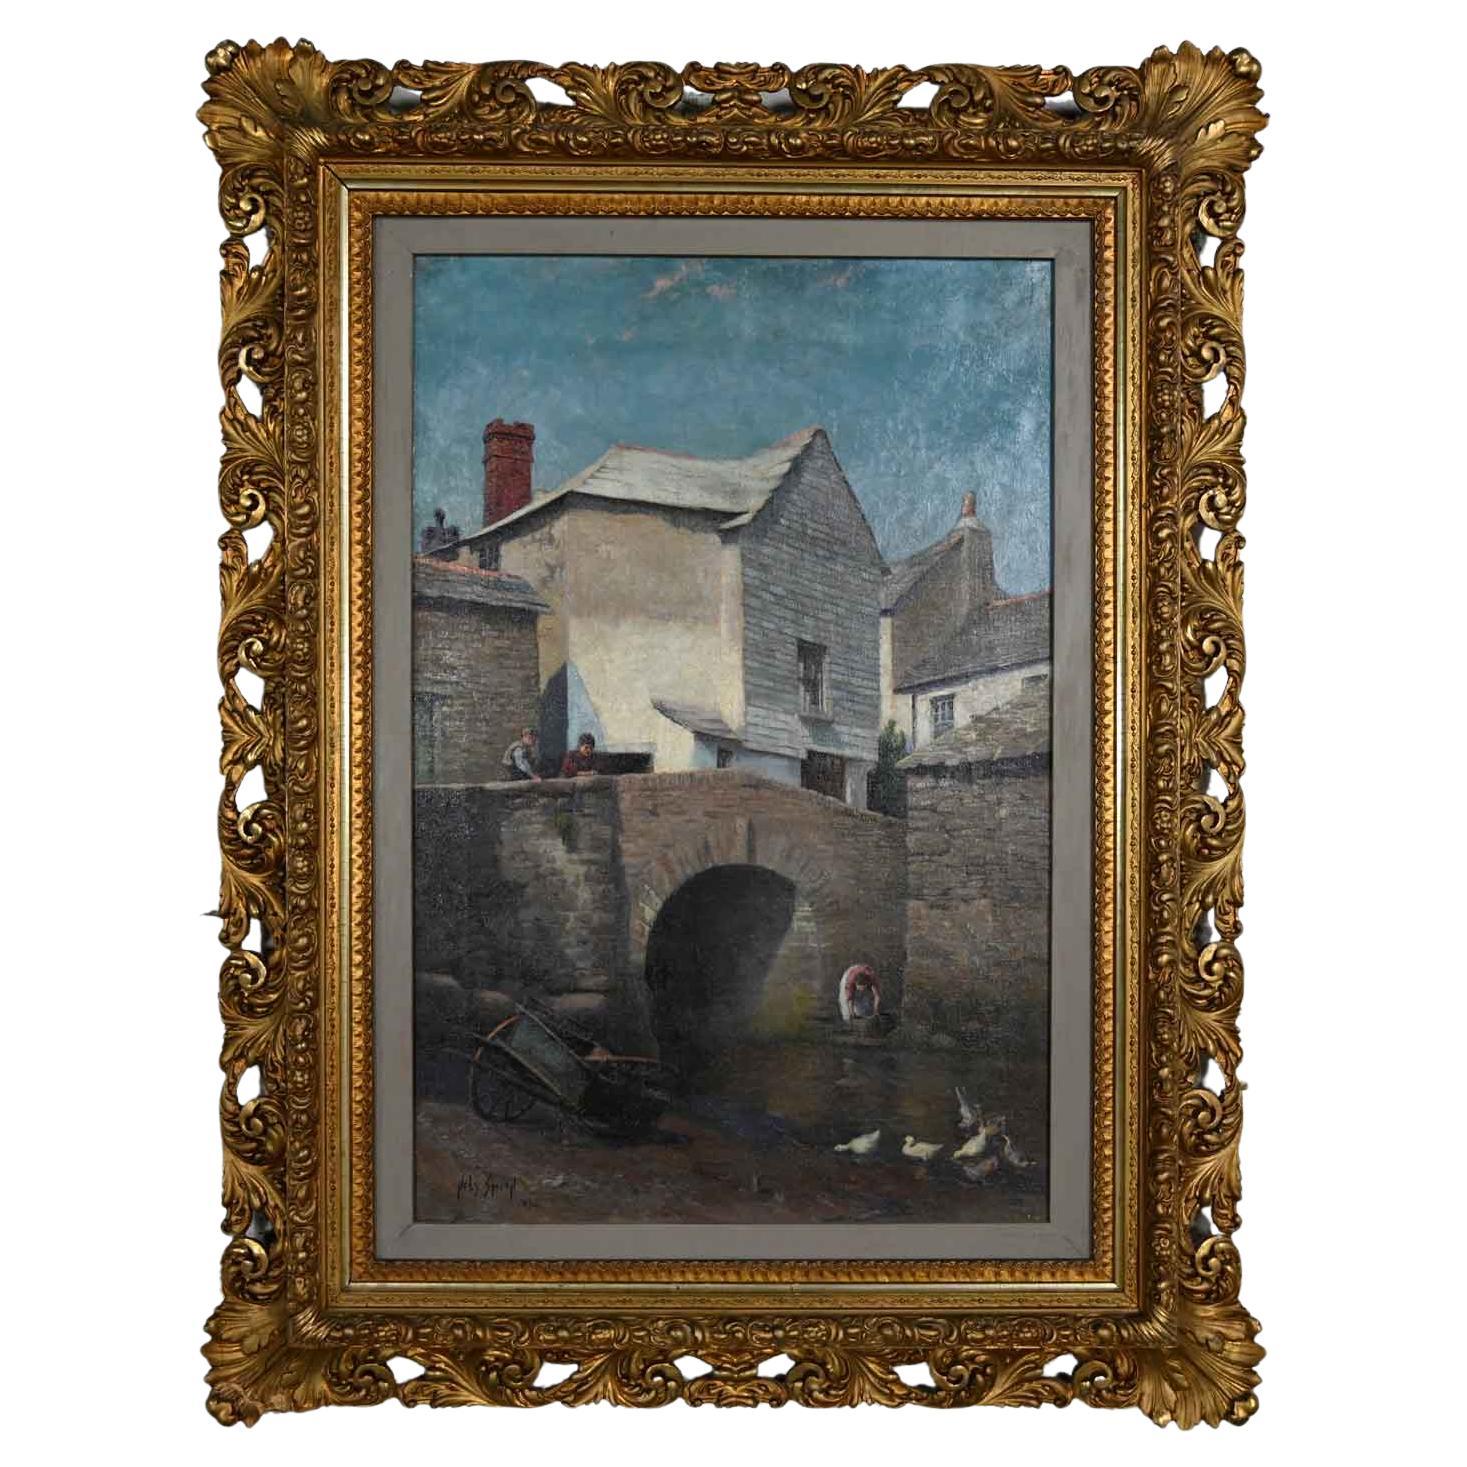 1896 Realism Landscape Oil Painting of Polperro by Hely Smith Orig Gilded Frame For Sale